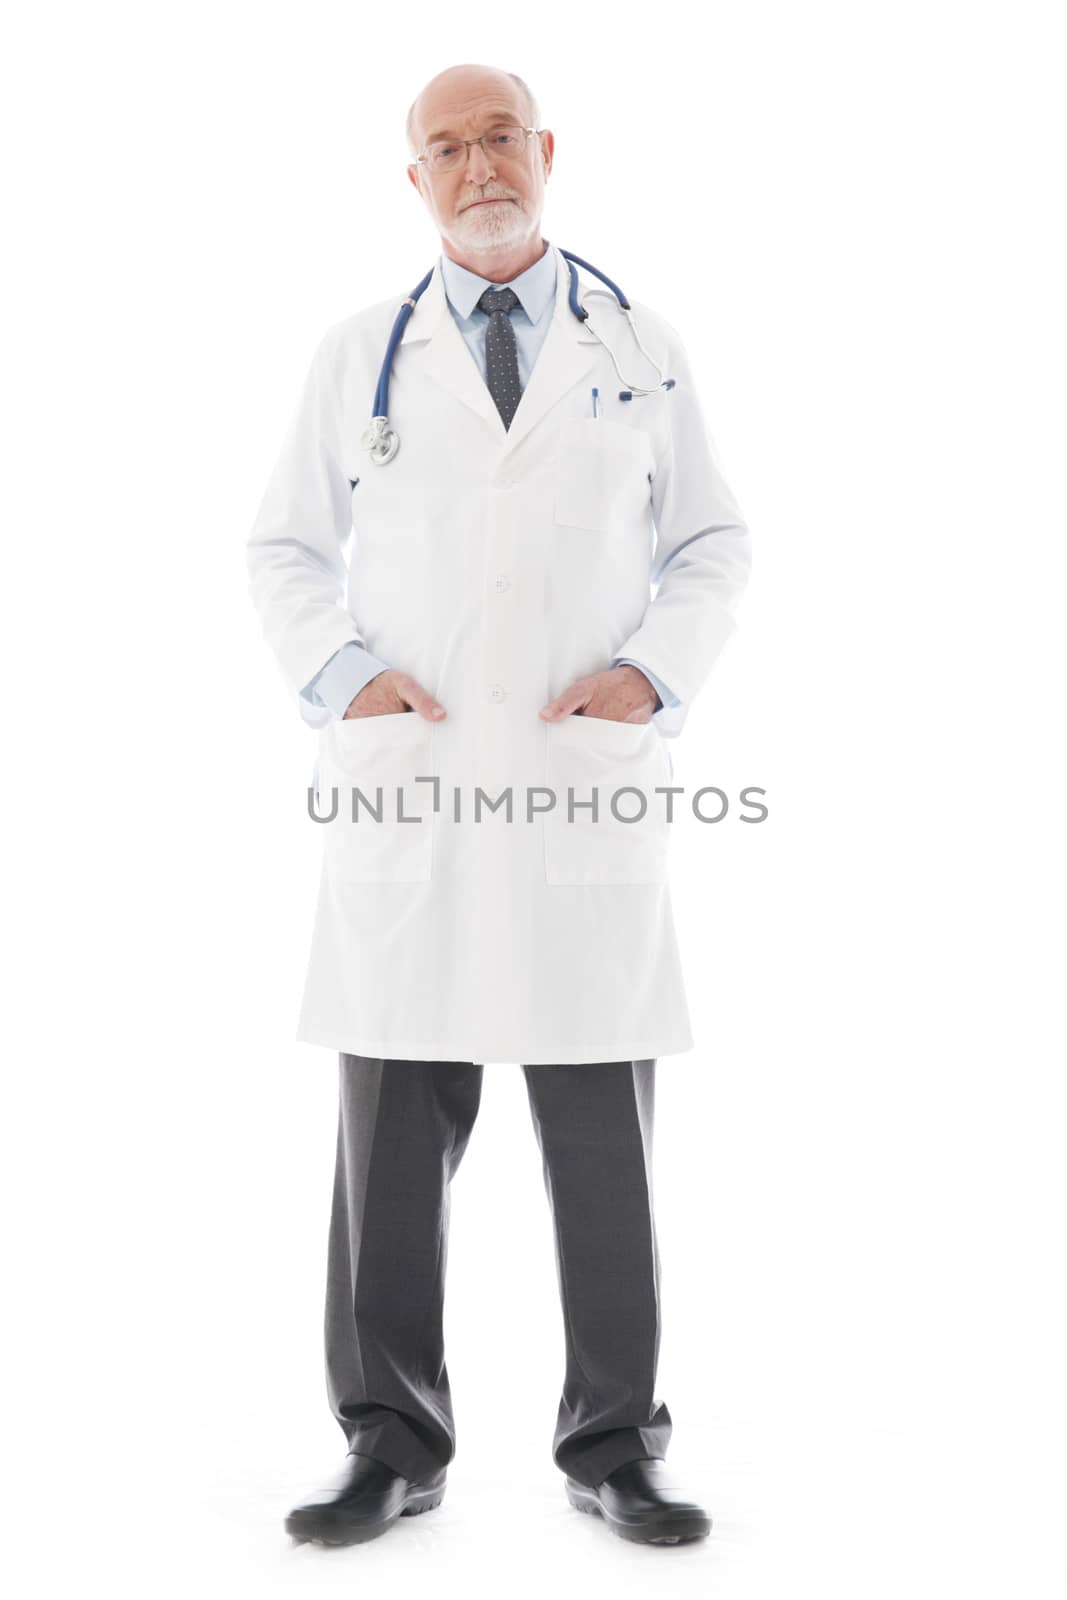 Mature doctor by ALotOfPeople